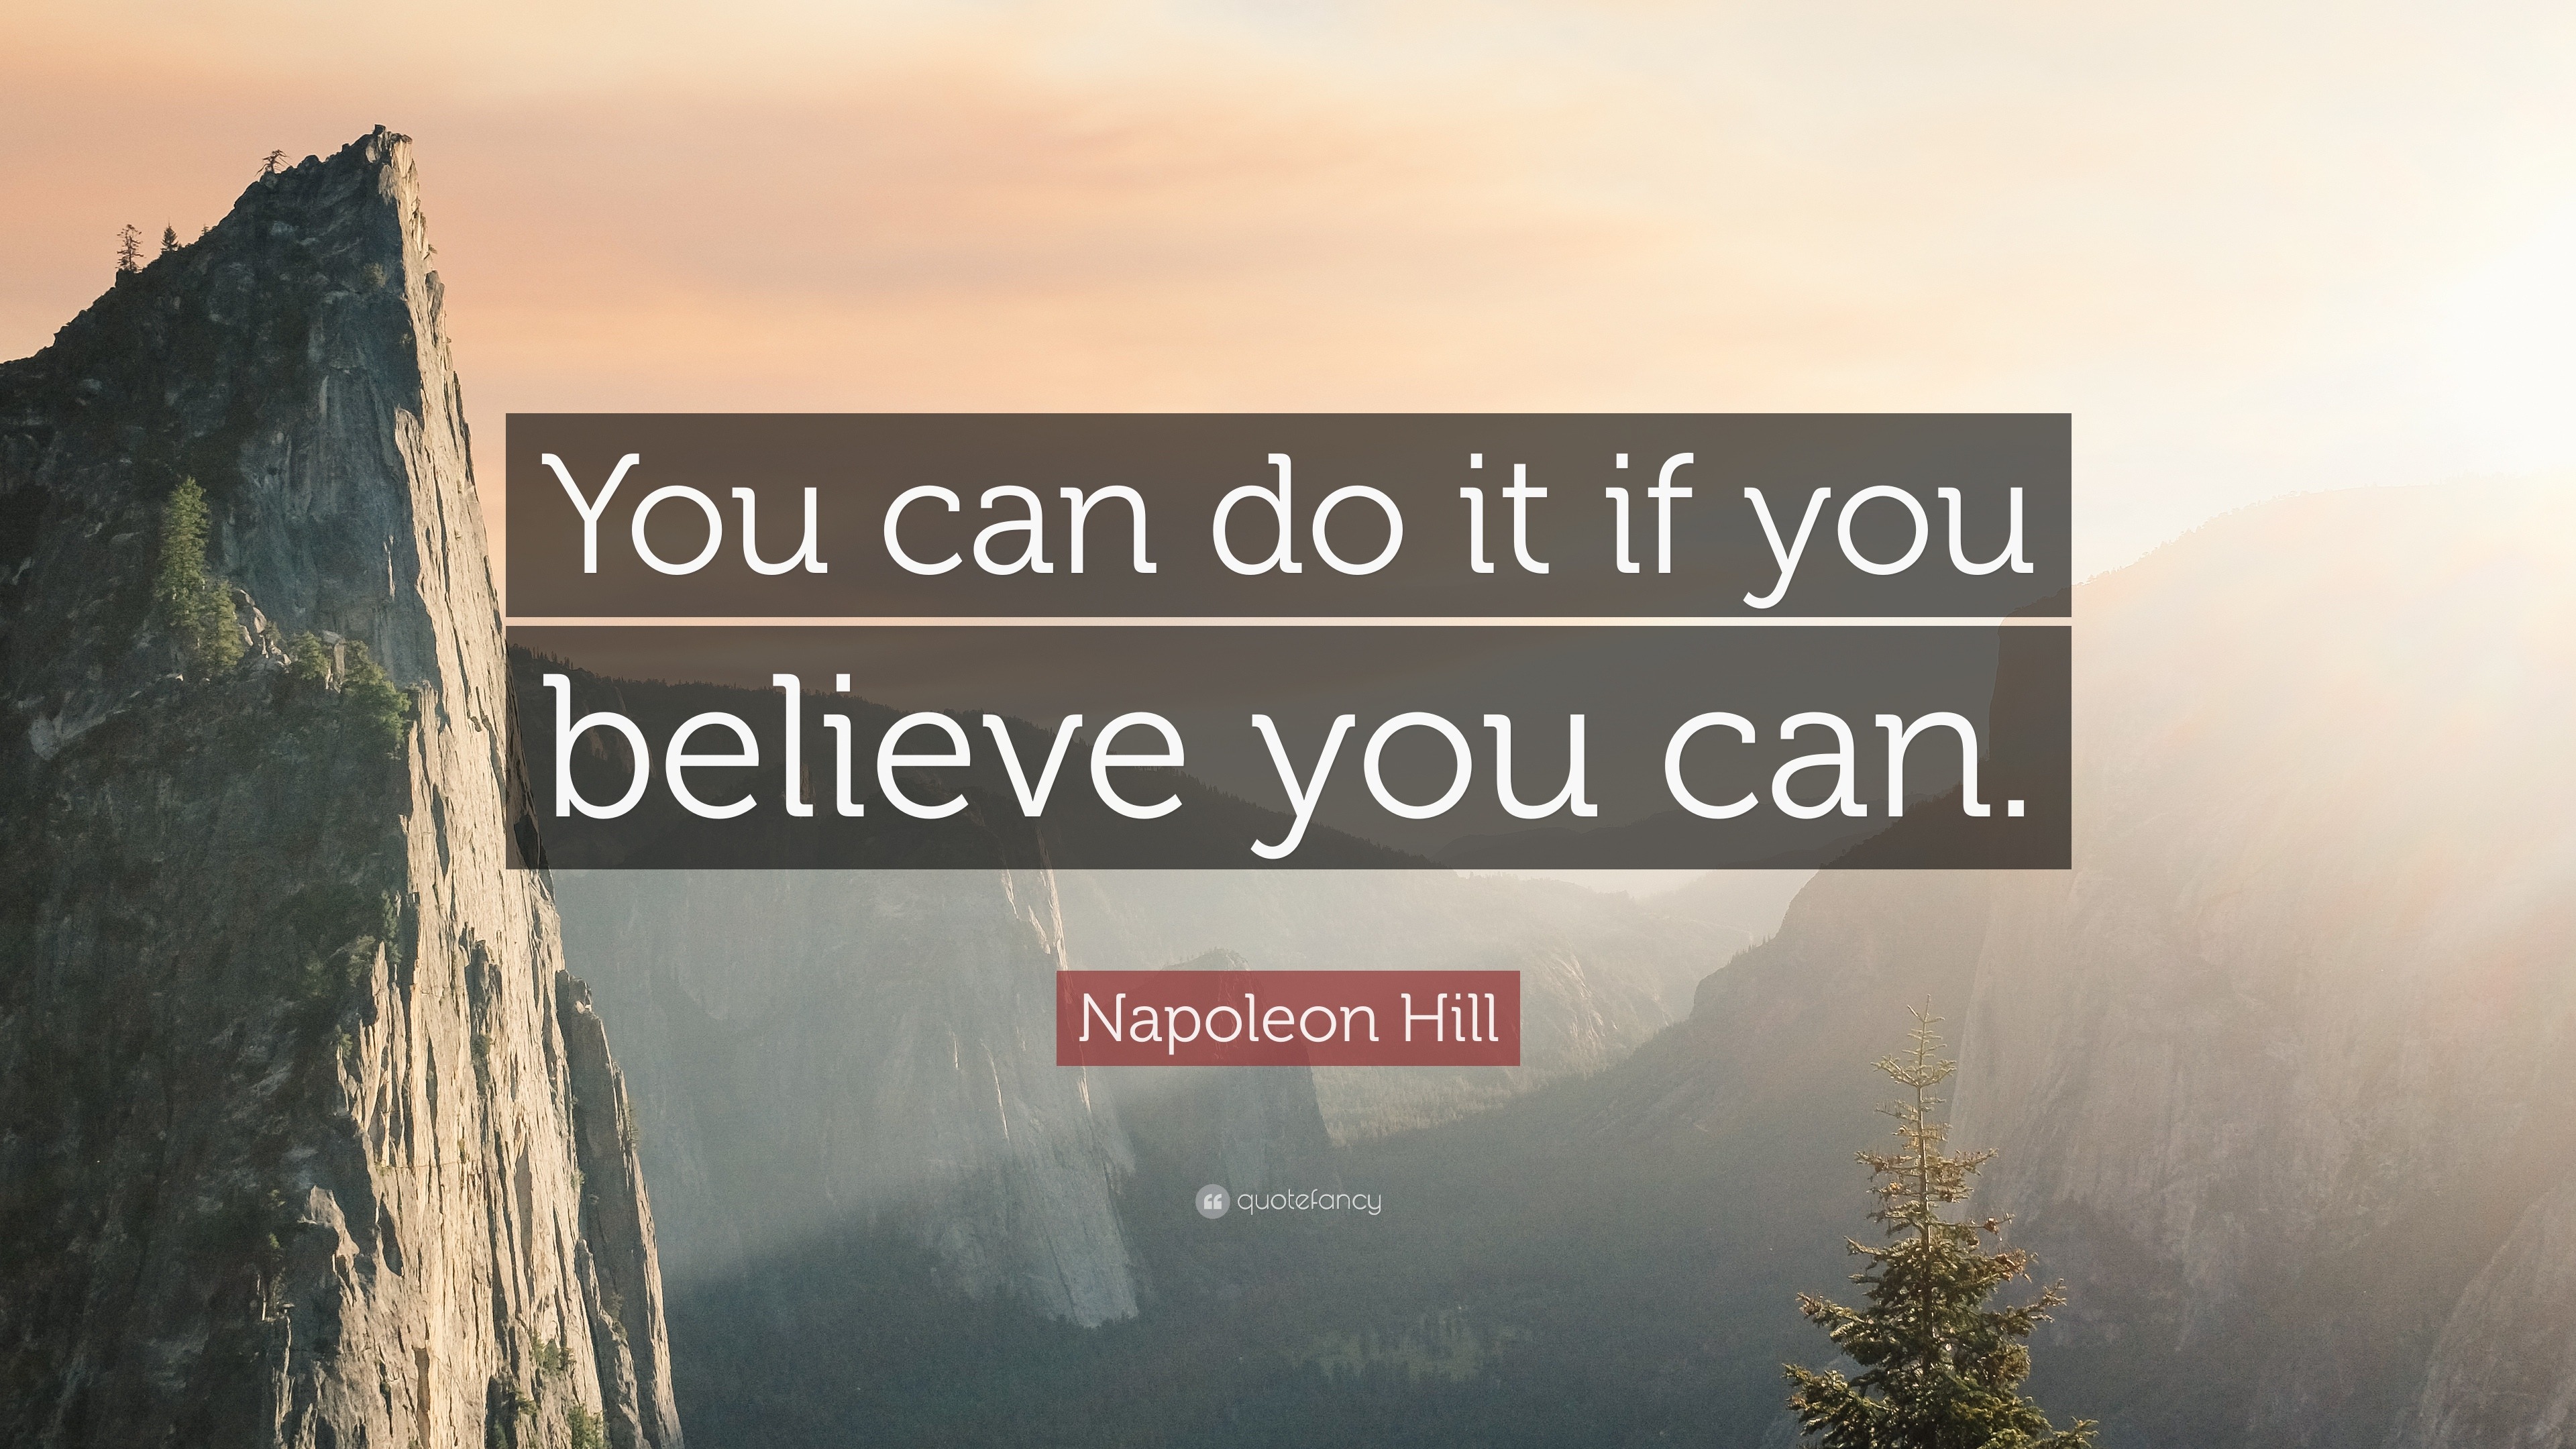 Napoleon Hill Quote: “You can do it if you believe you can.” (12